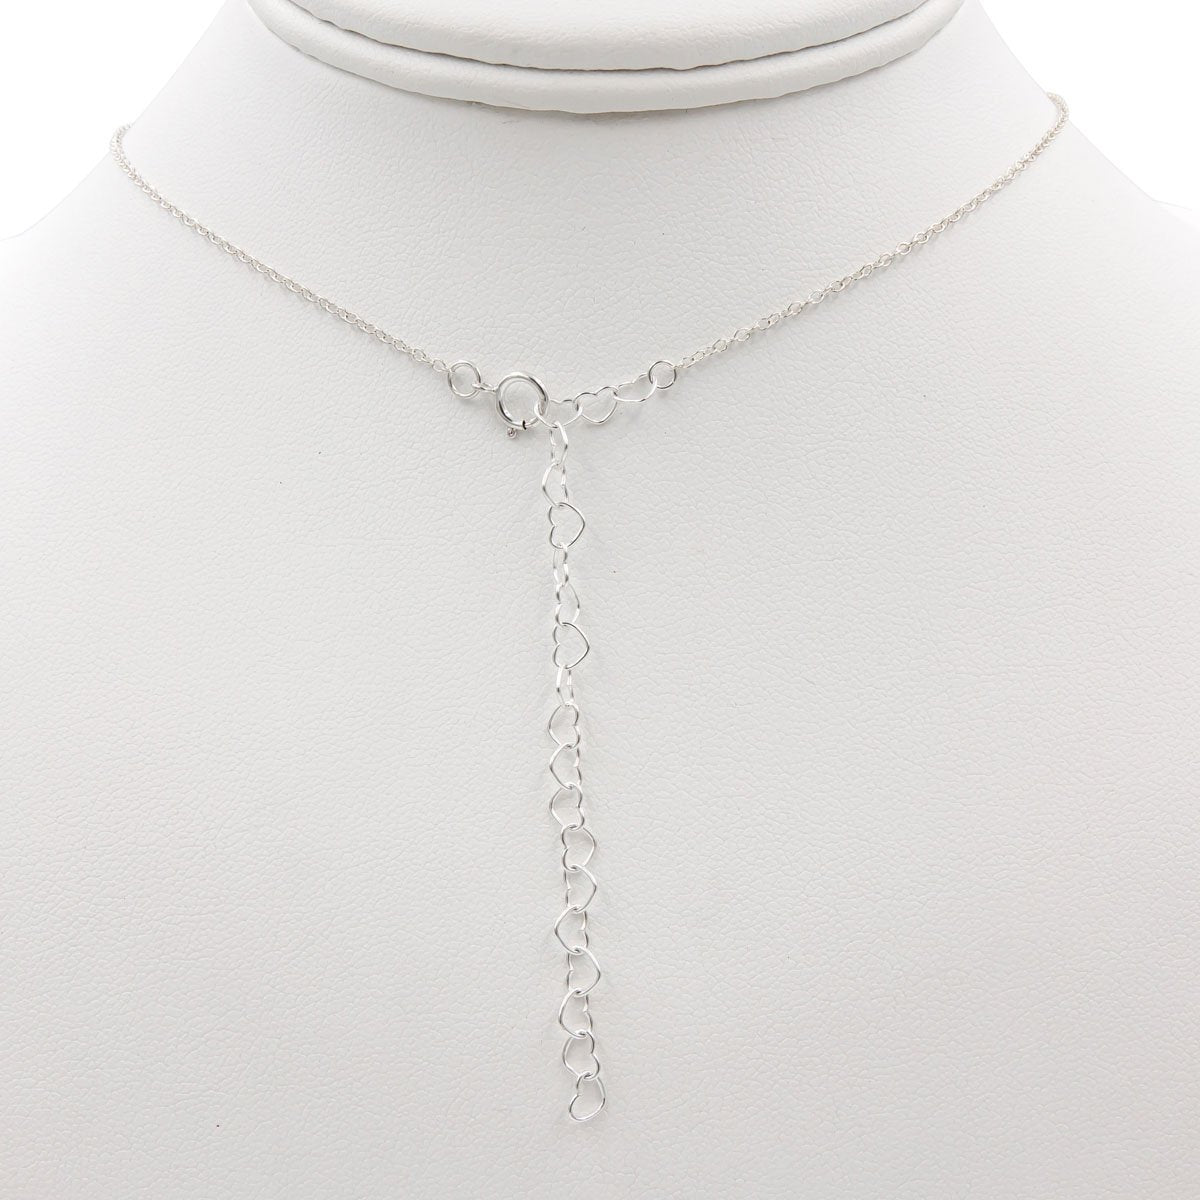 Handmade Earth Song Jewelry Sterling Silver necklaces are adjustable with a 3” heart chain!